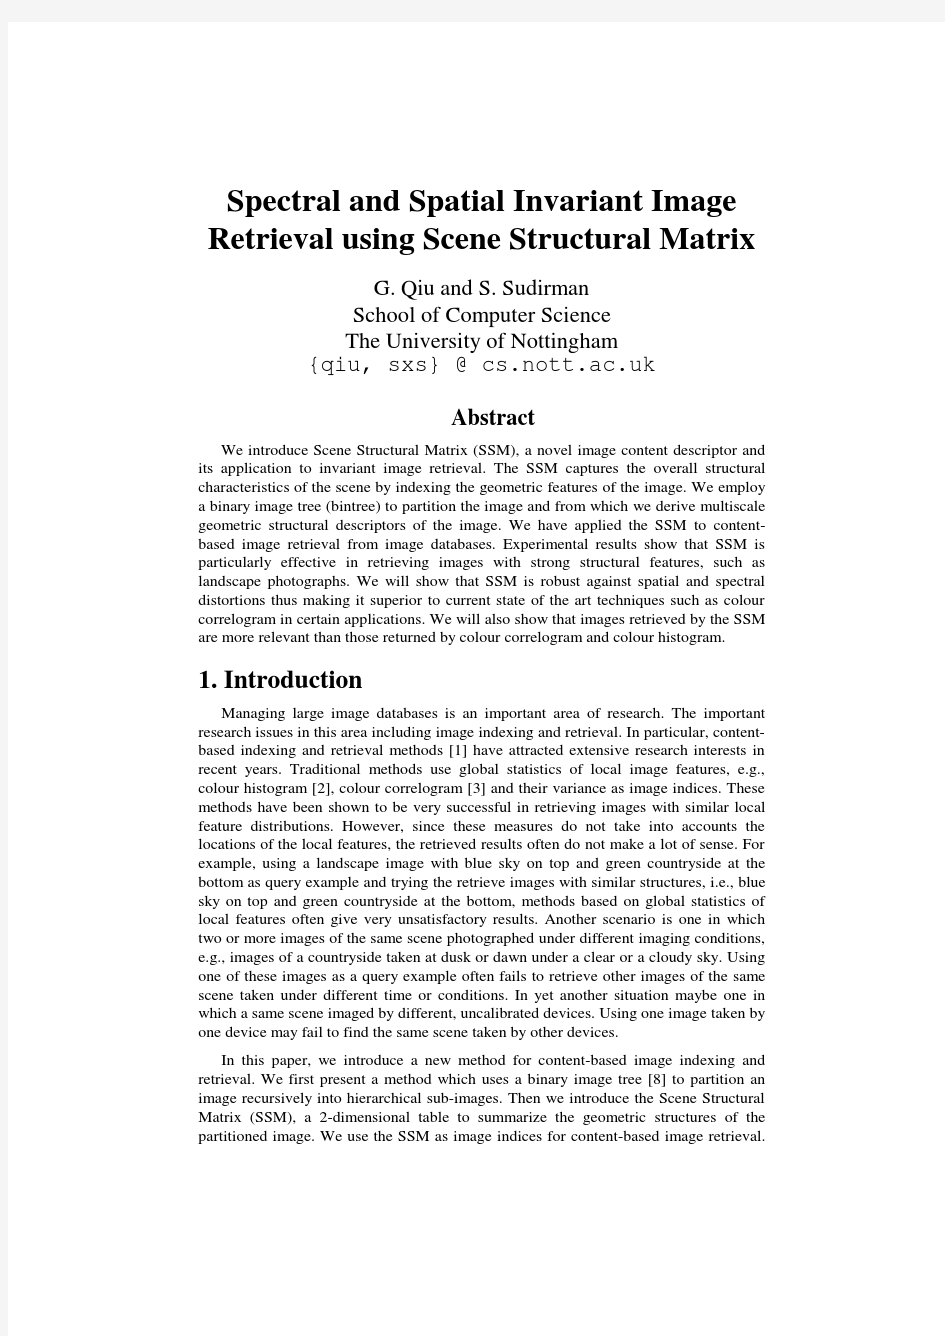 Spectral and spatial invariant image retrieval using scene structural matrix